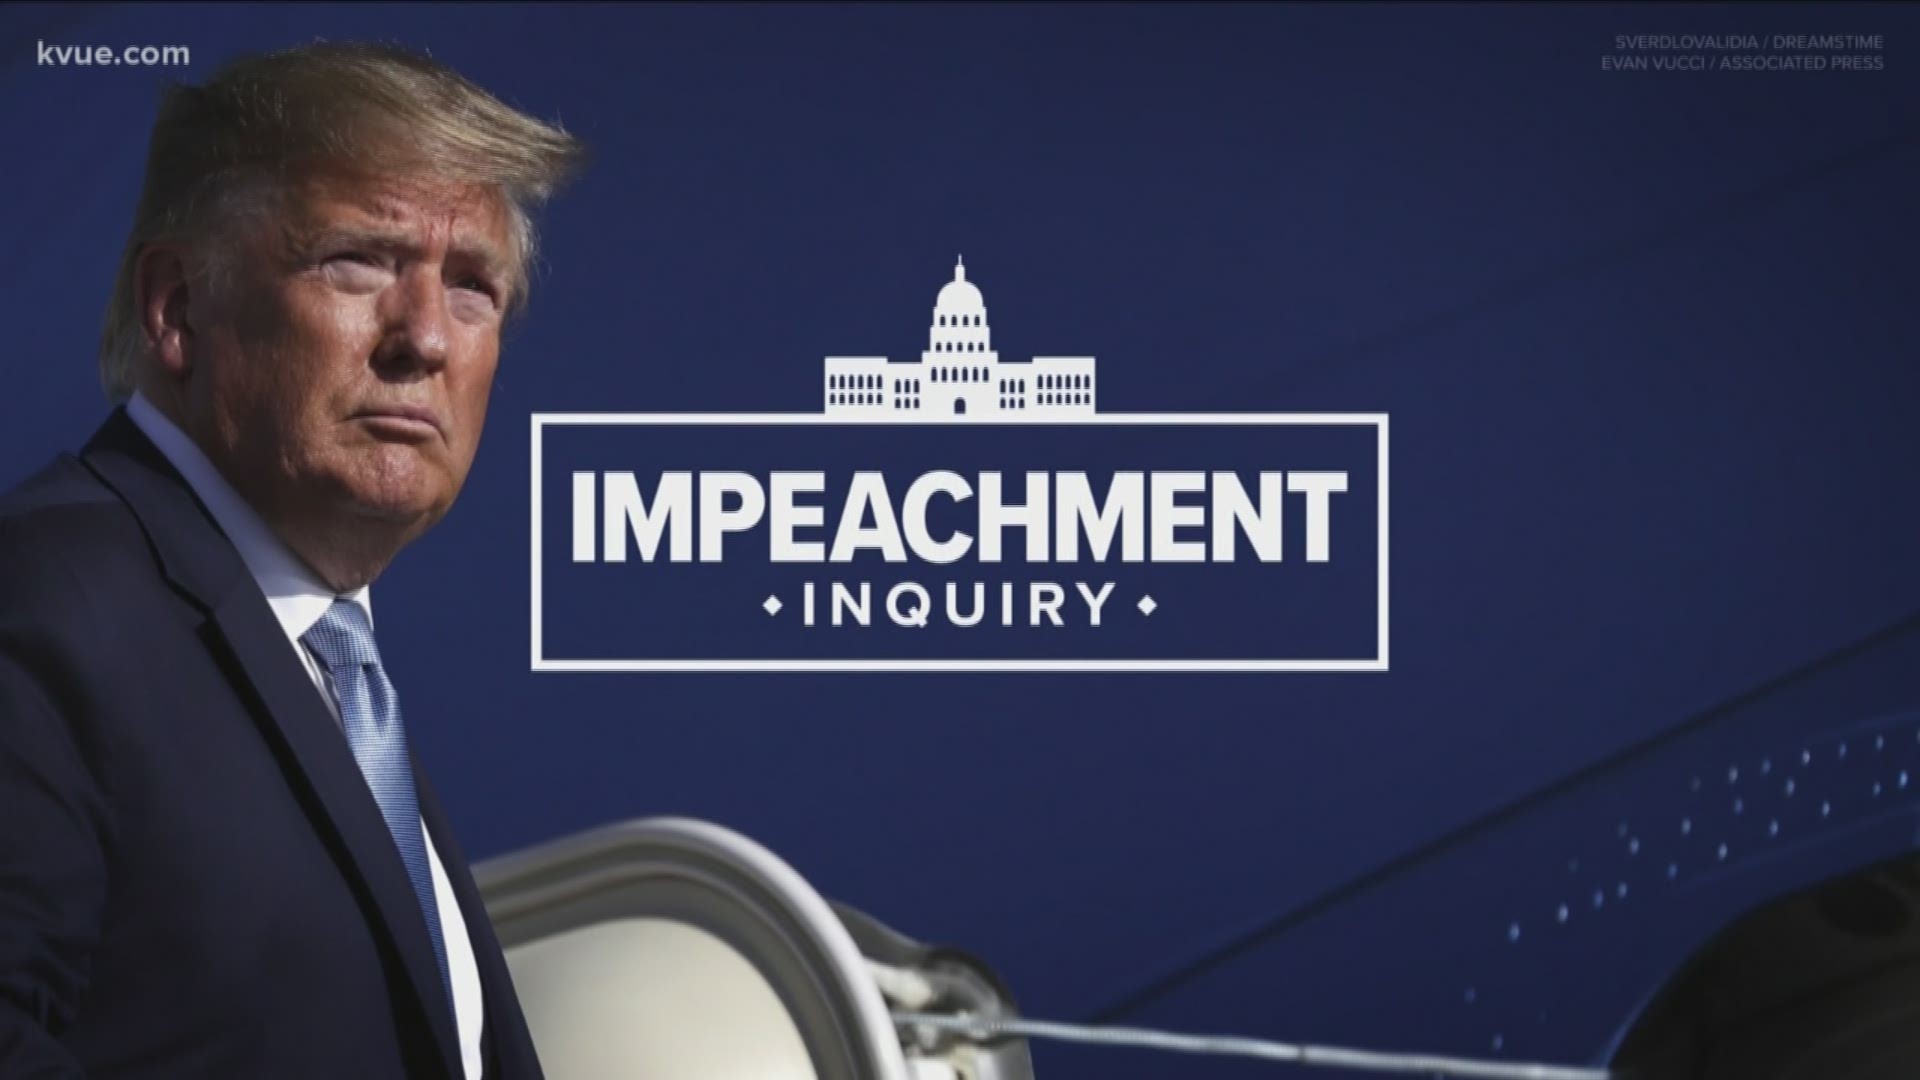 The White House says it will no longer cooperate in the investigation around President Trump and it seems Americans are split on the idea of impeaching him.